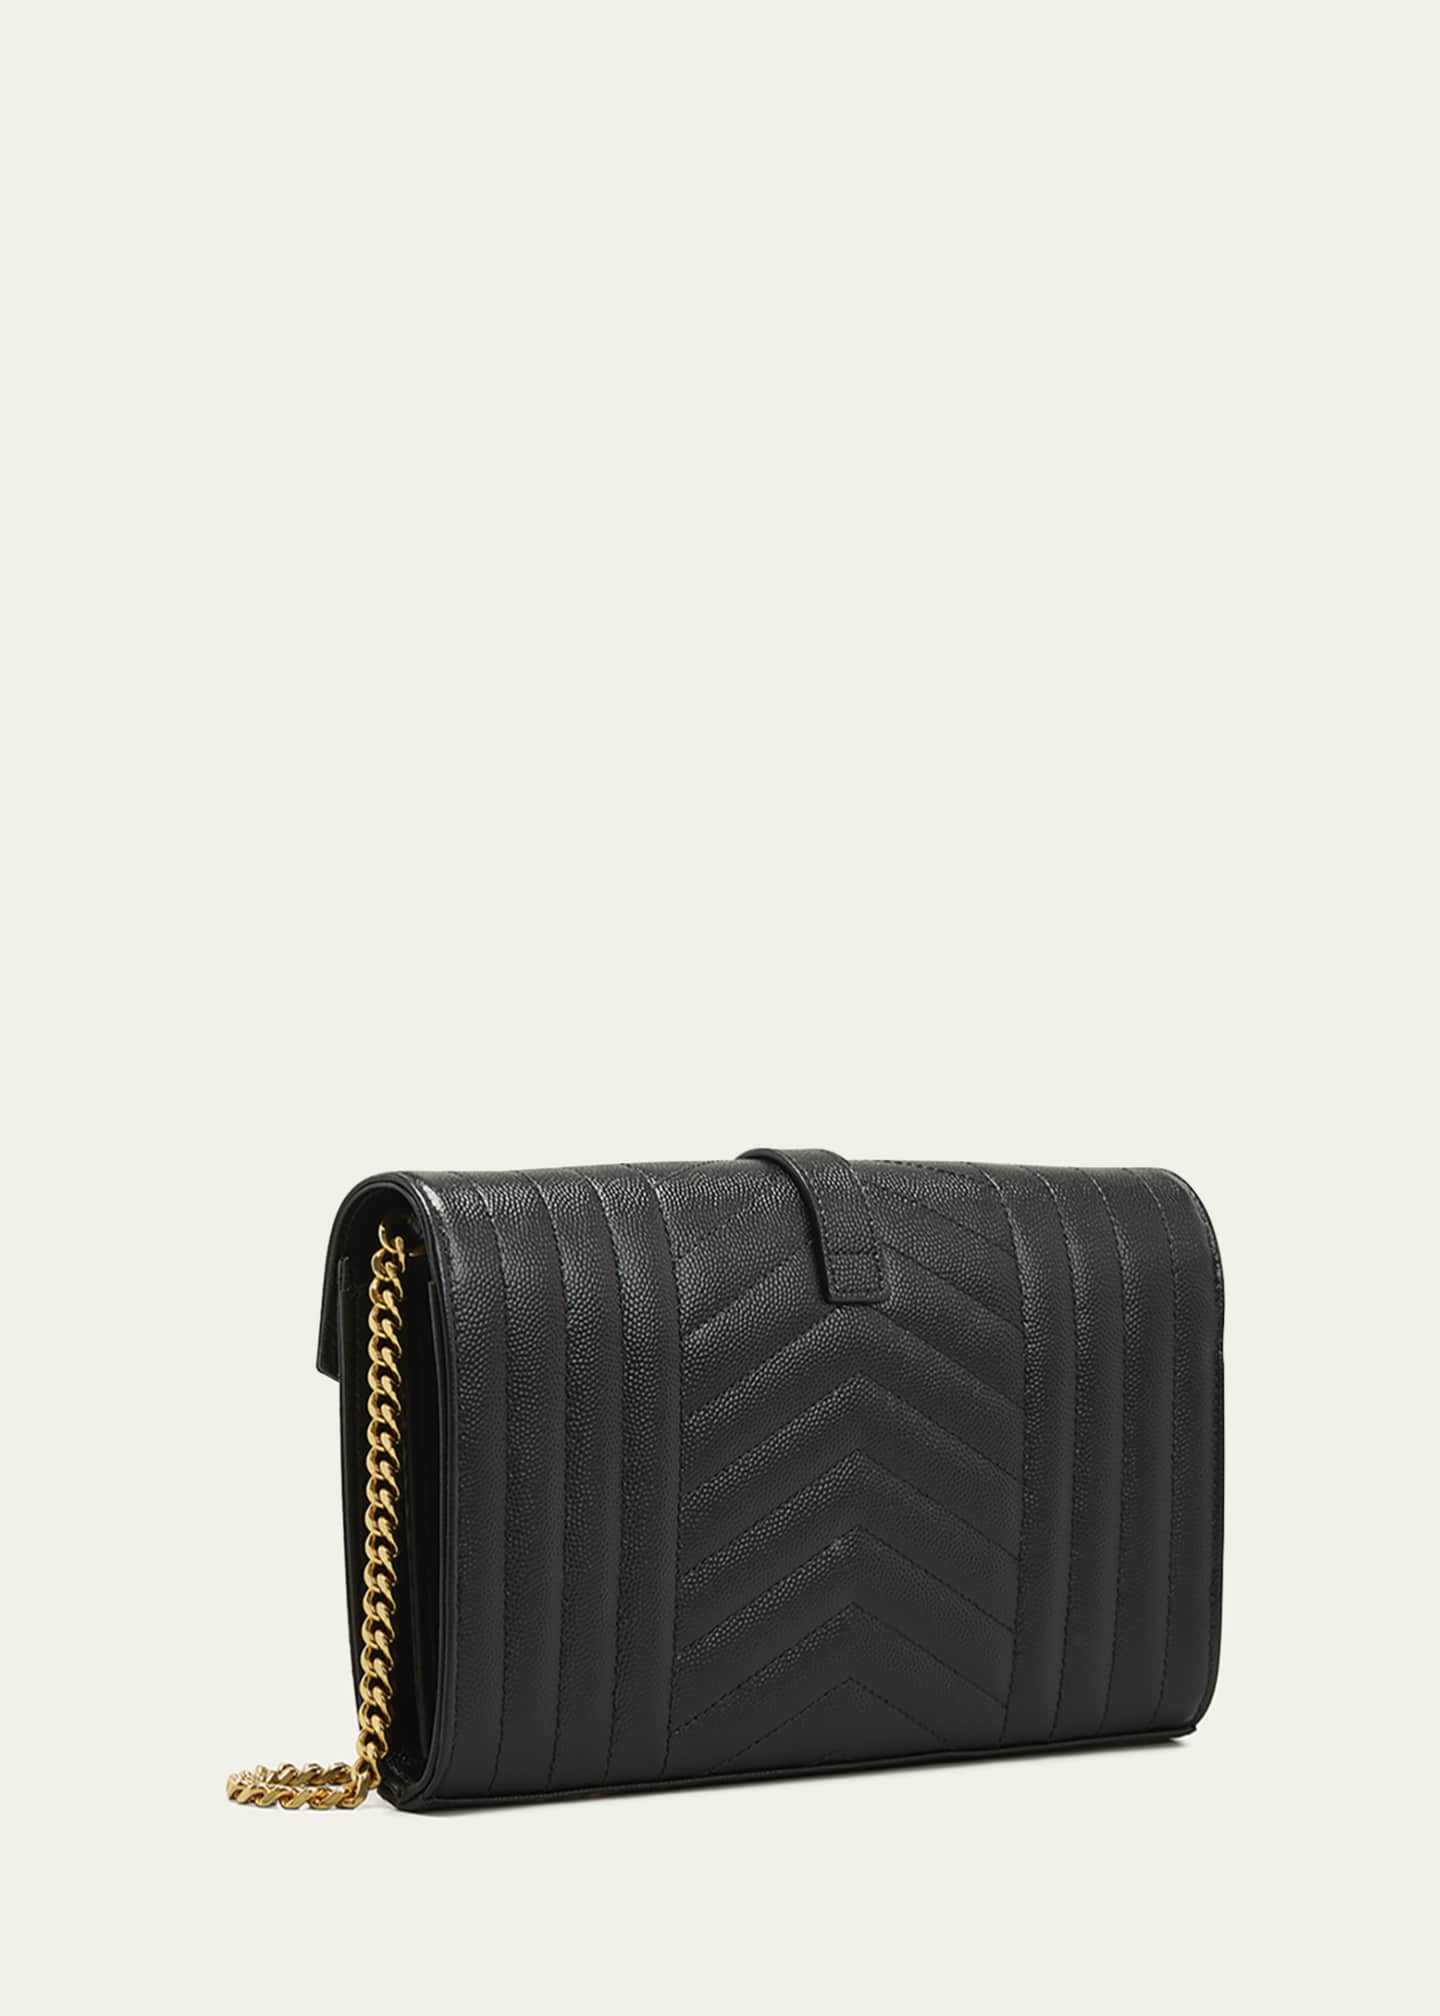 Saint Laurent Envelope Triquilt YSL Wallet on Chain in Grained Leather Image 3 of 5